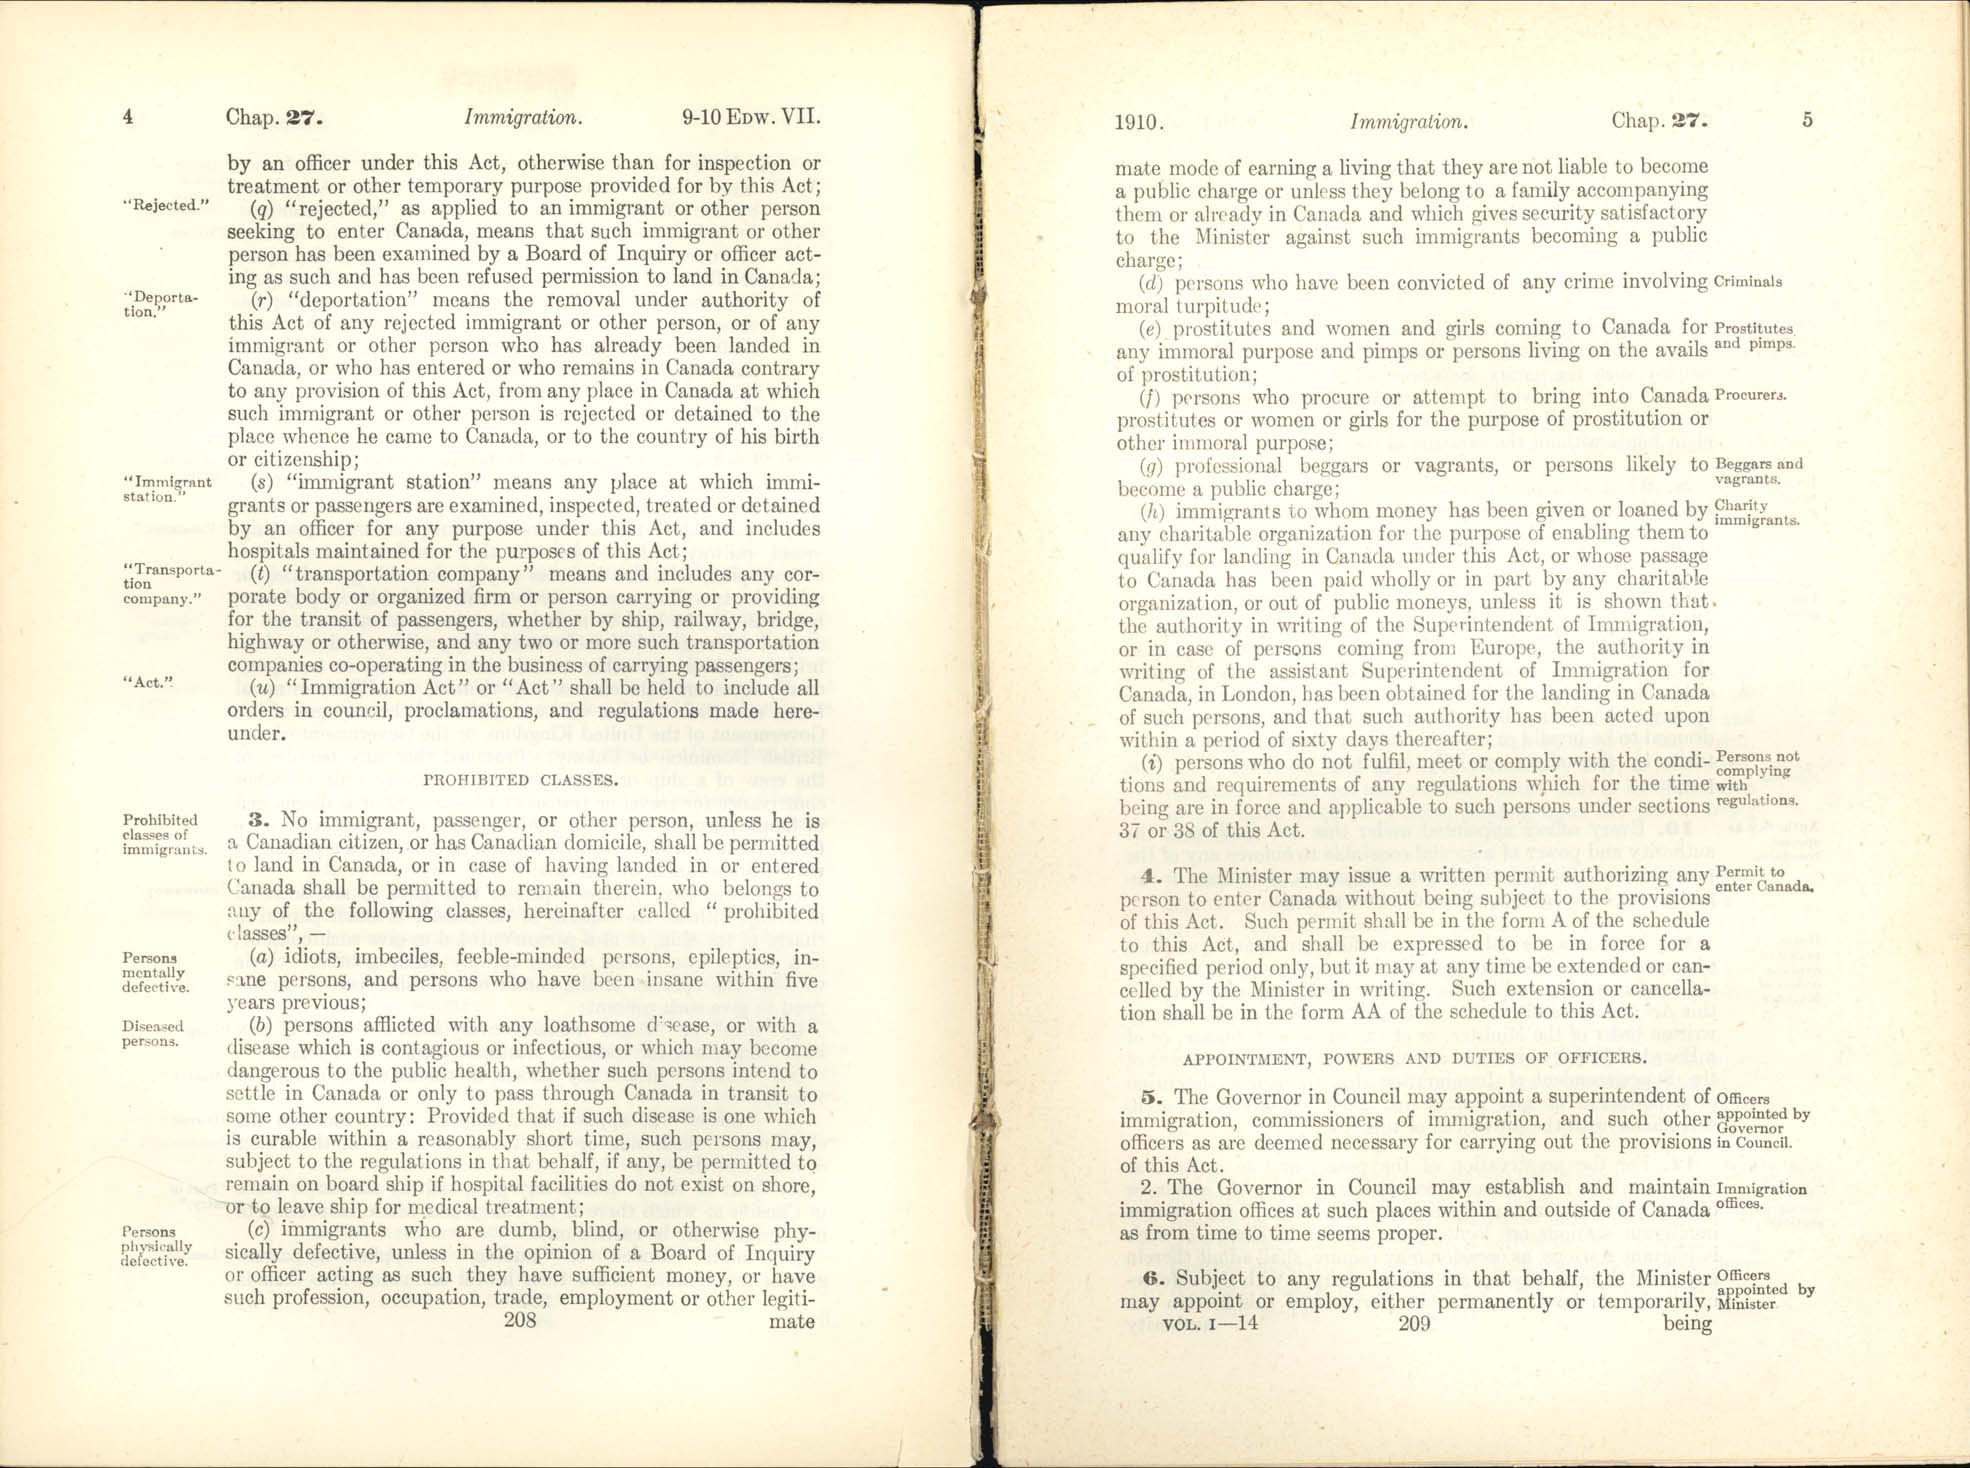 Chap. 27 Page 208, 209 Immigration Act, 1910